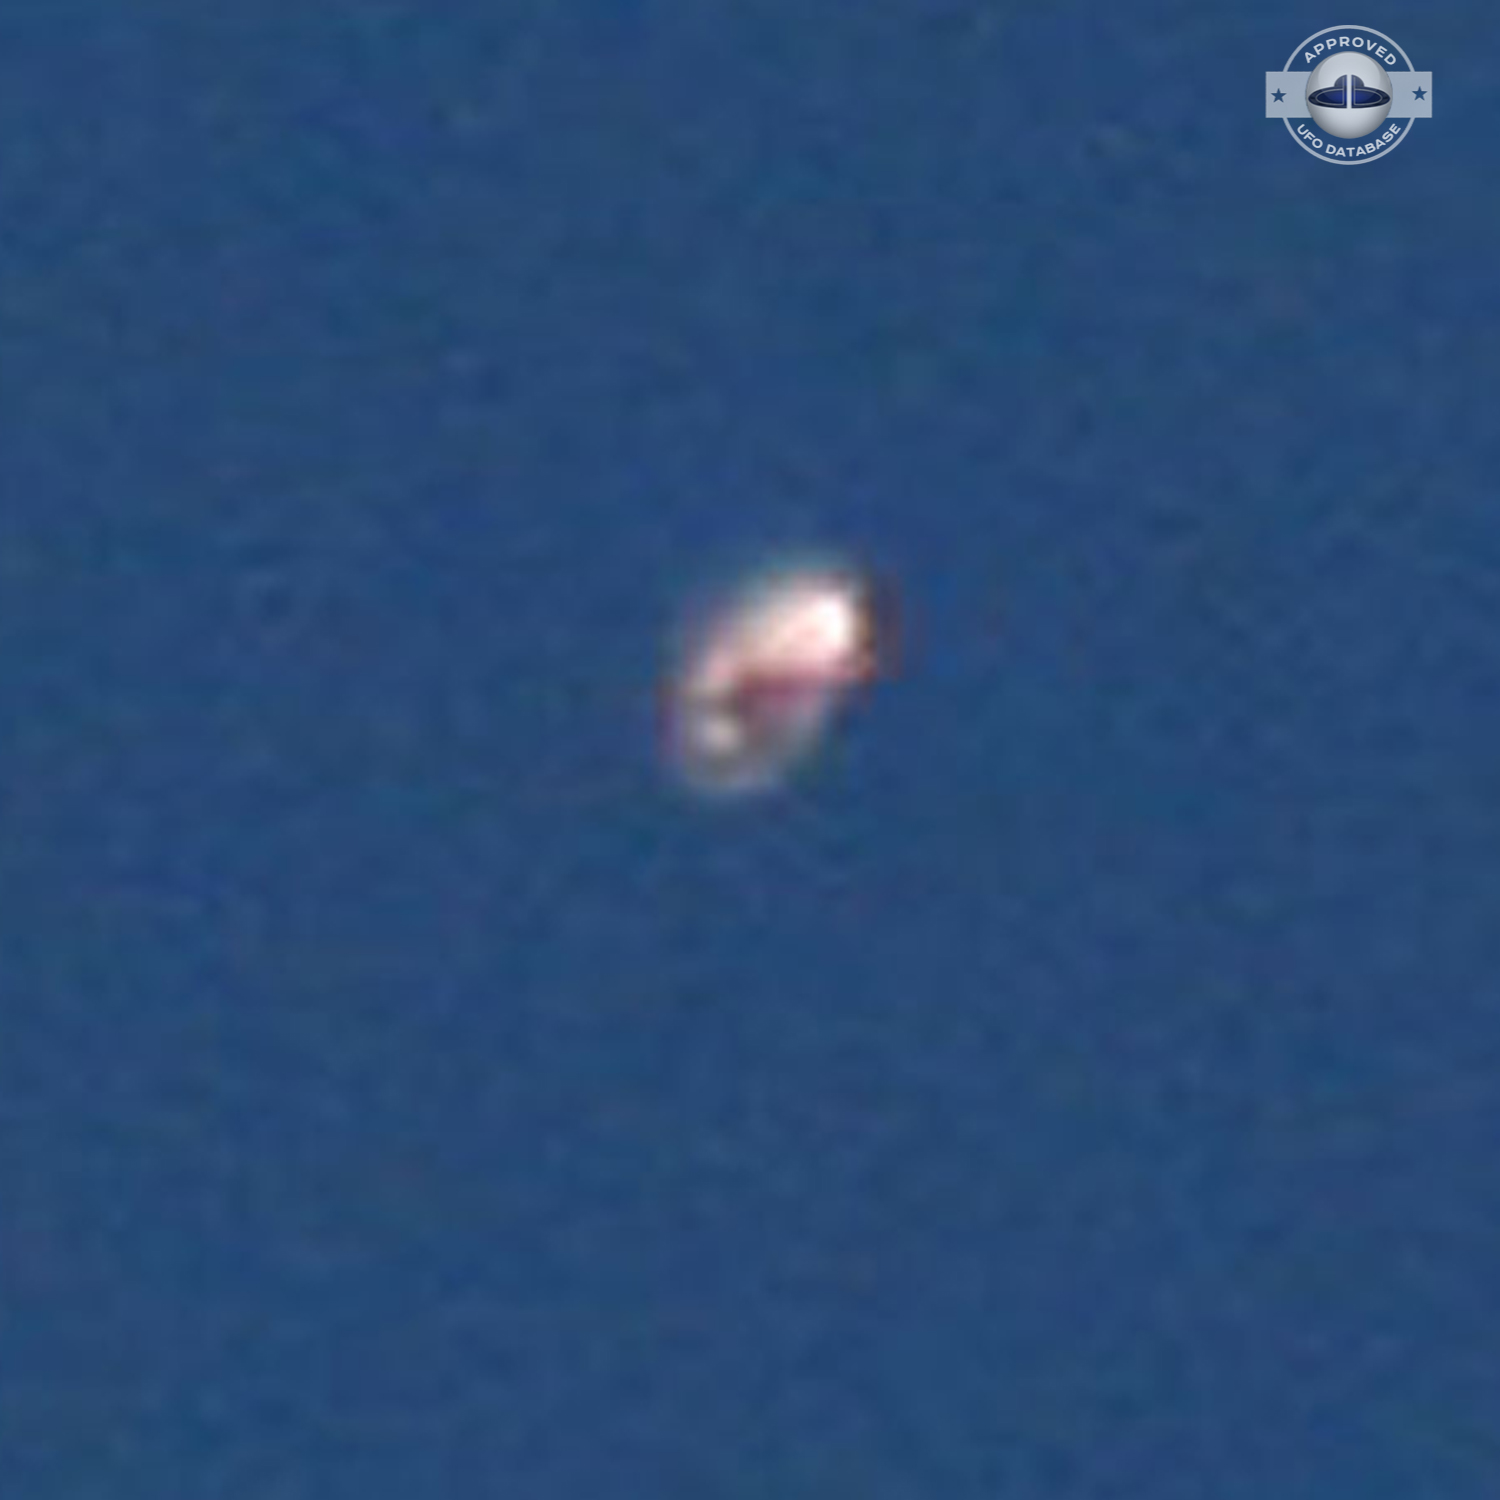 Very bright reflective UFO - Thousands Oaks California - pictures 2012 UFO Picture #516-4